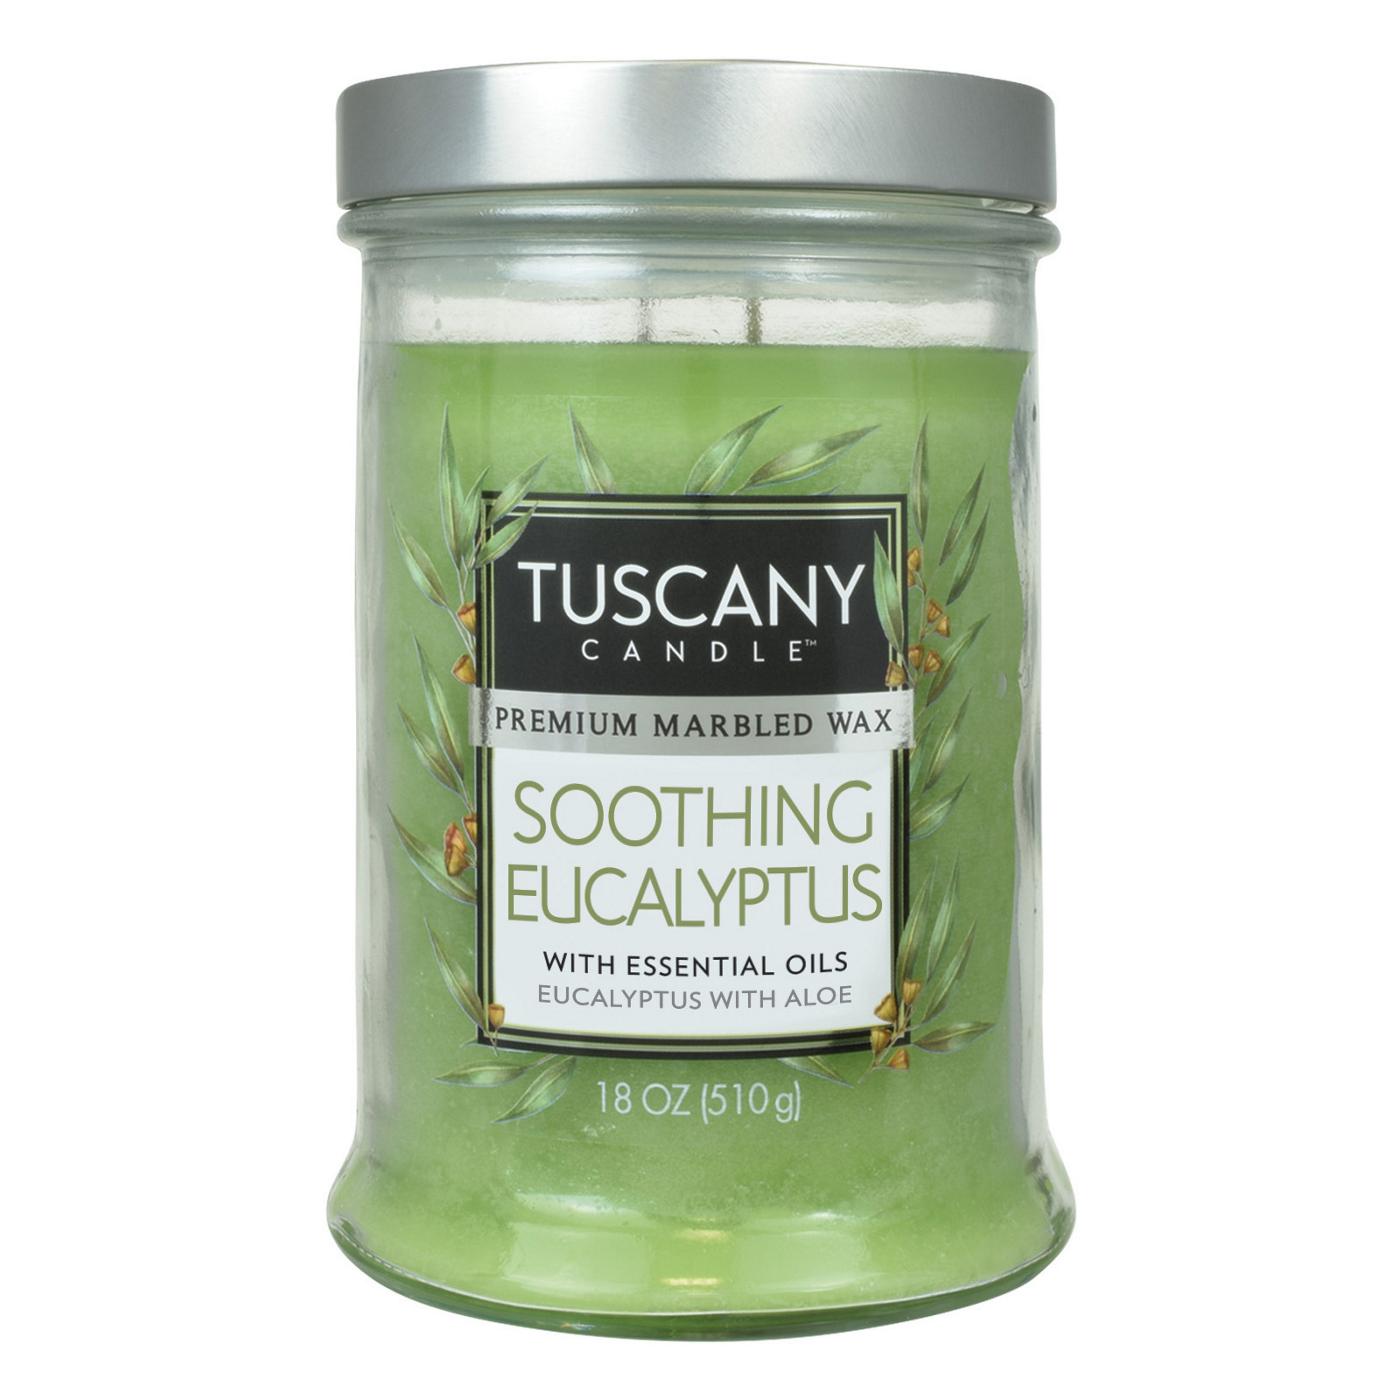 Tuscany Candle Soothing Eucalyptus Scented Candle; image 1 of 2